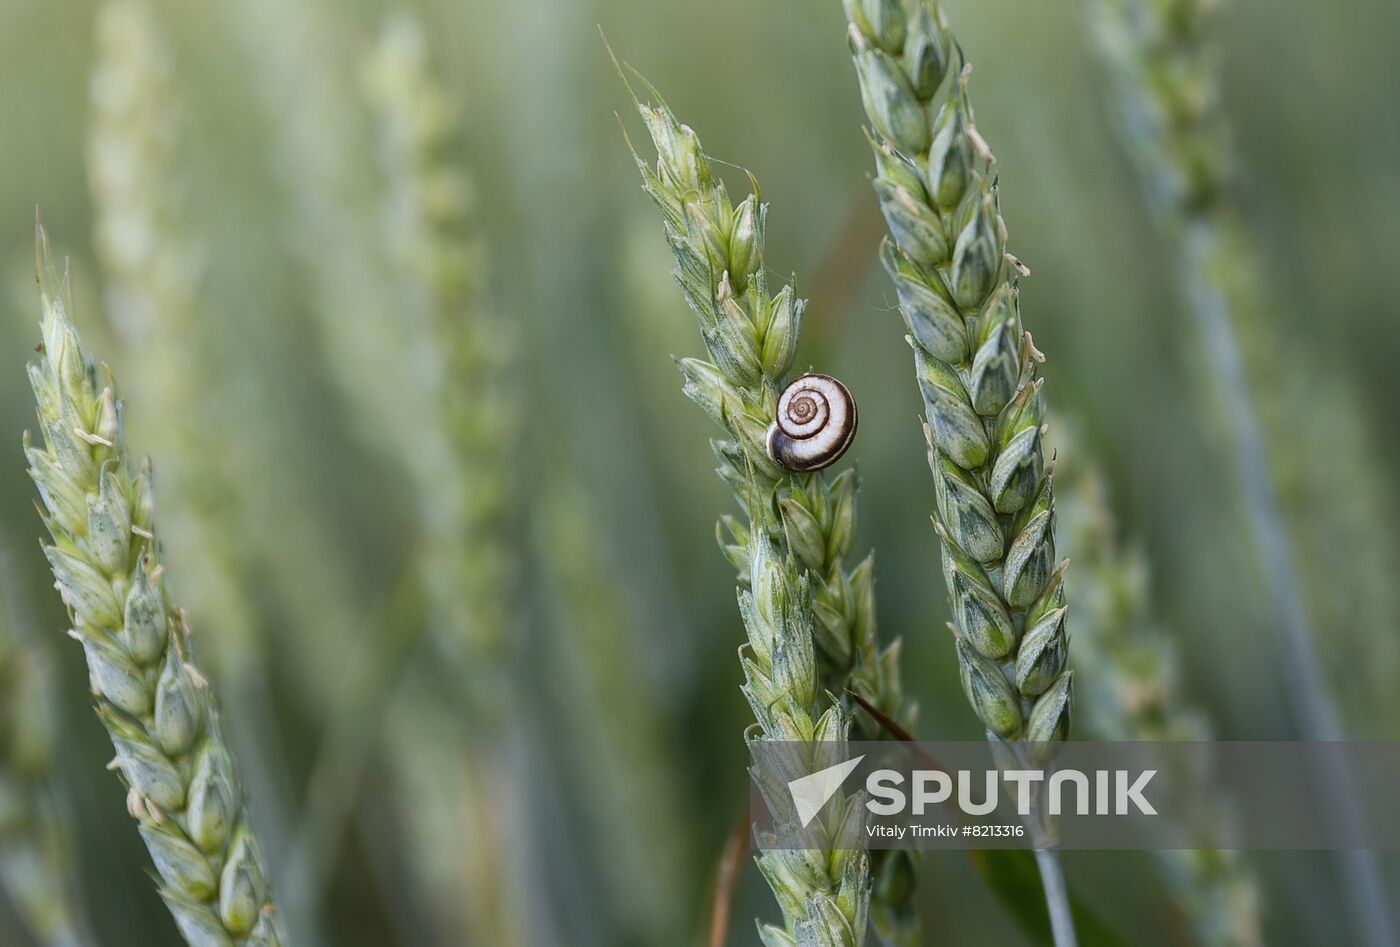 Russia Agriculture Wheat Variety